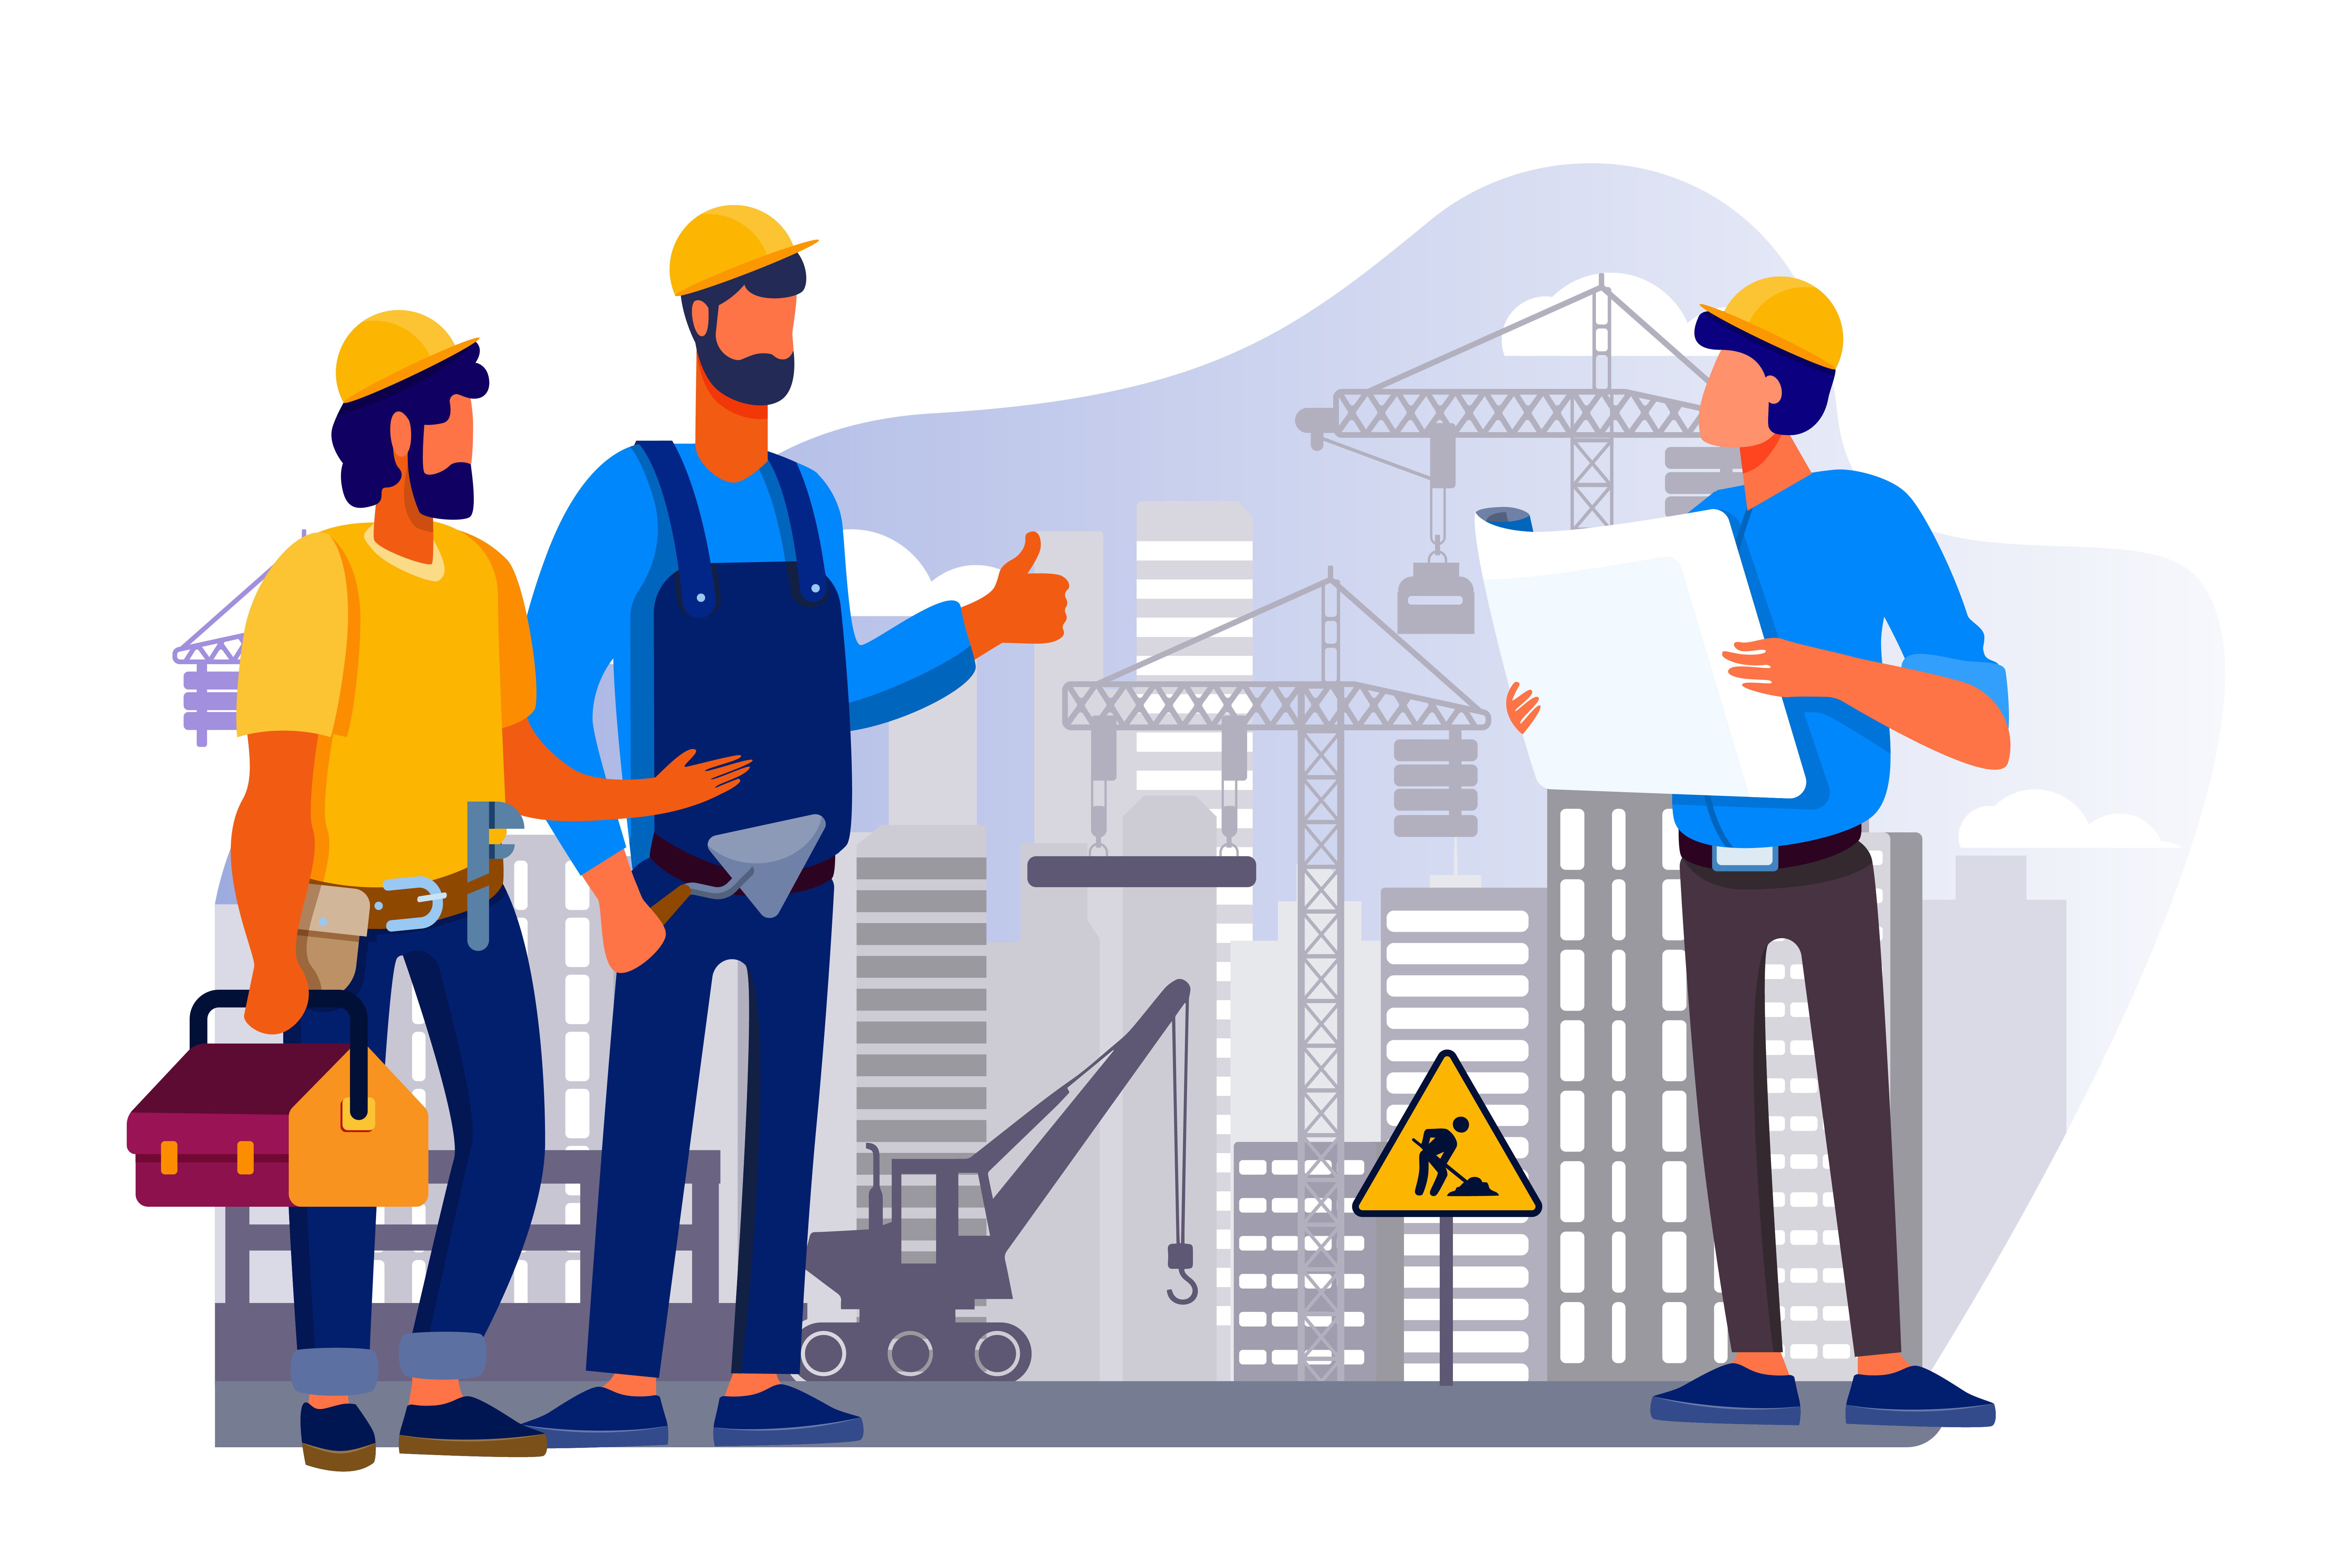 Building Your Career: How to Write an Outstanding Site Engineer CV